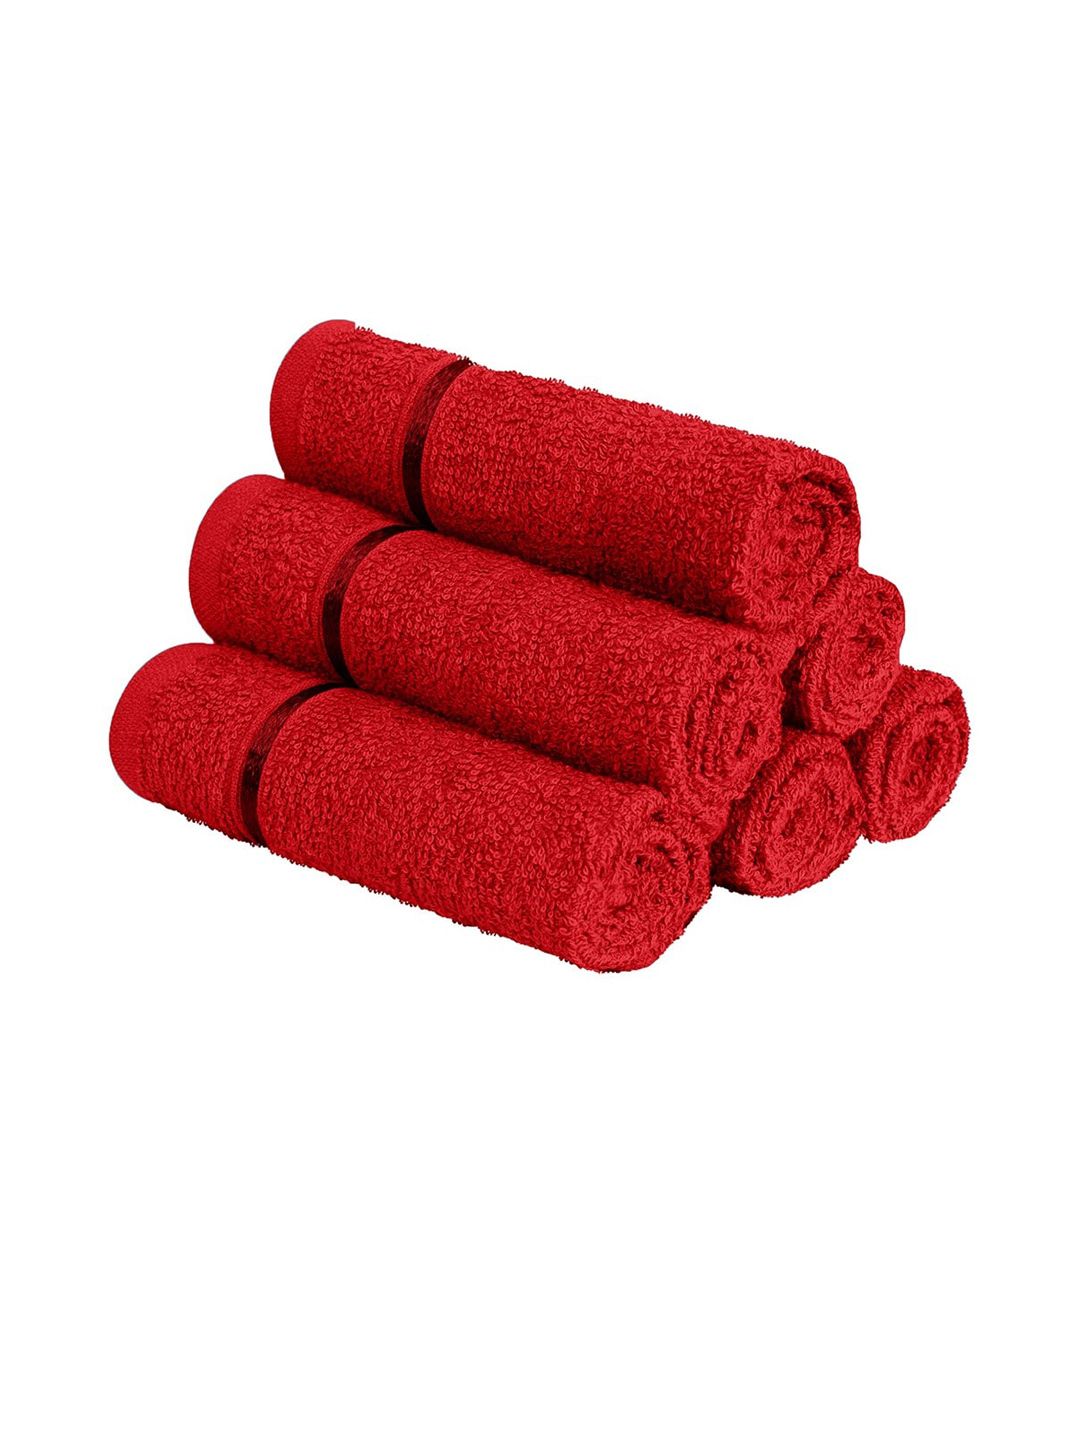 Story@home Set Of 6 Red Solid Pure Cotton 450 GSM Face Towels Price in India